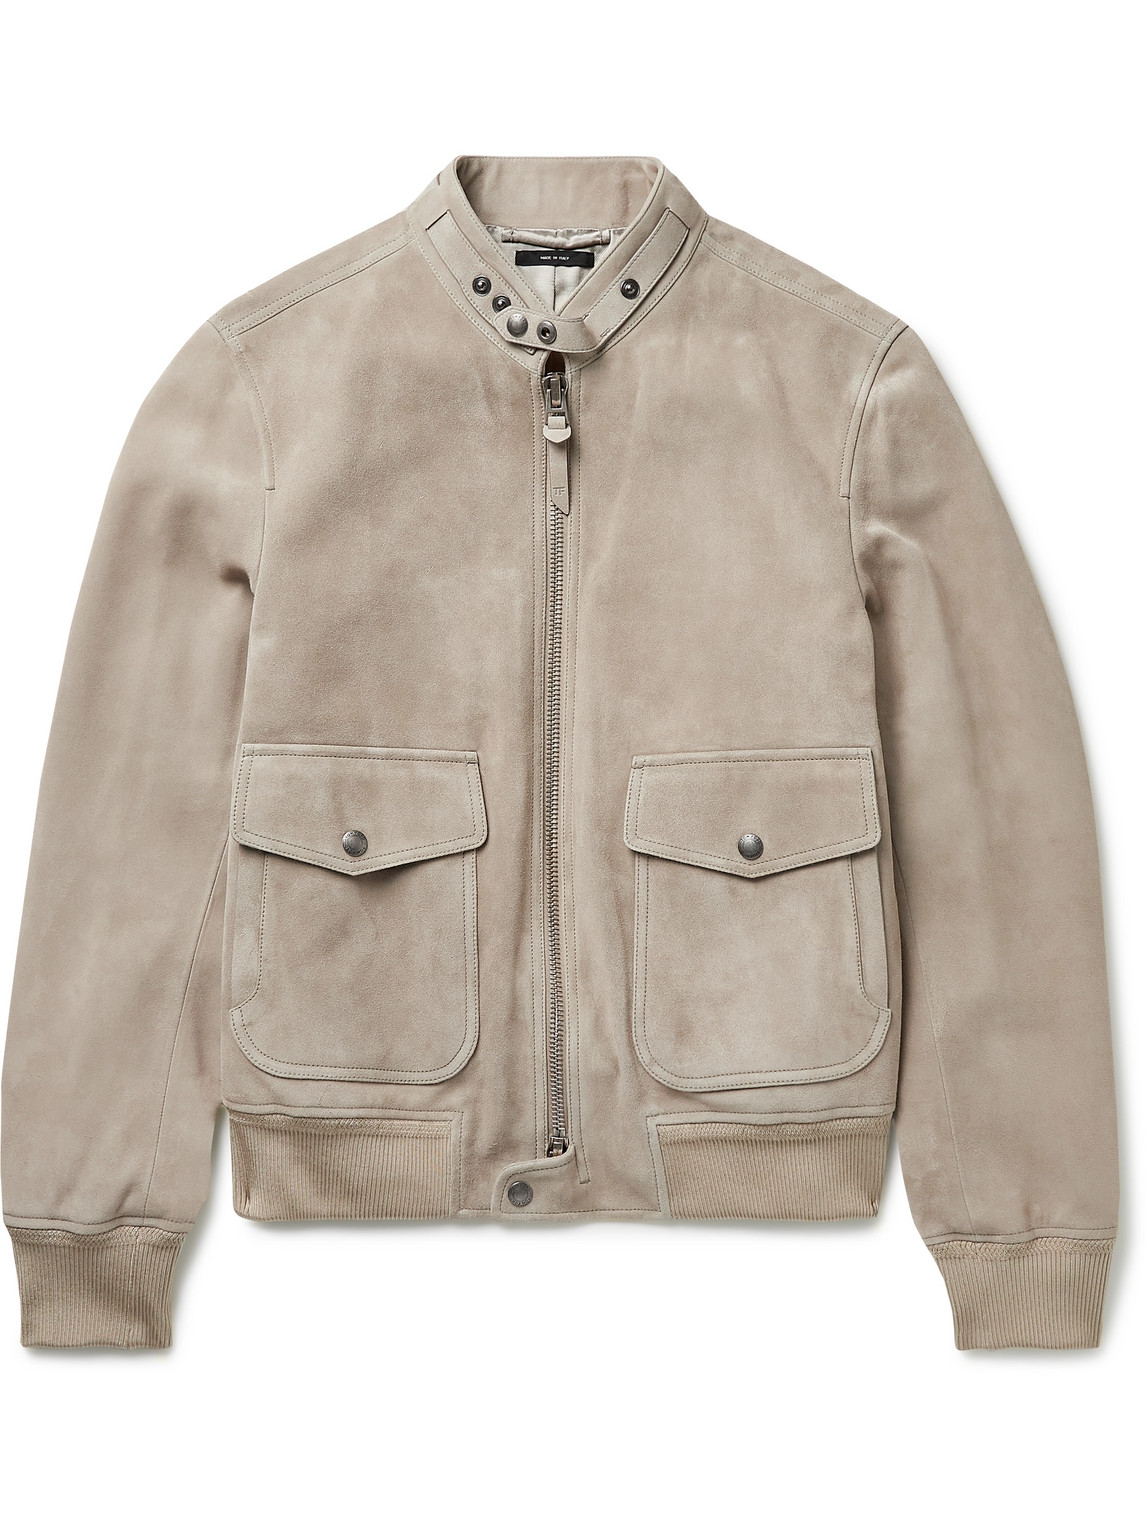 Tom Ford Members Only Slim-fit Suede Jacket In Neutrals | ModeSens